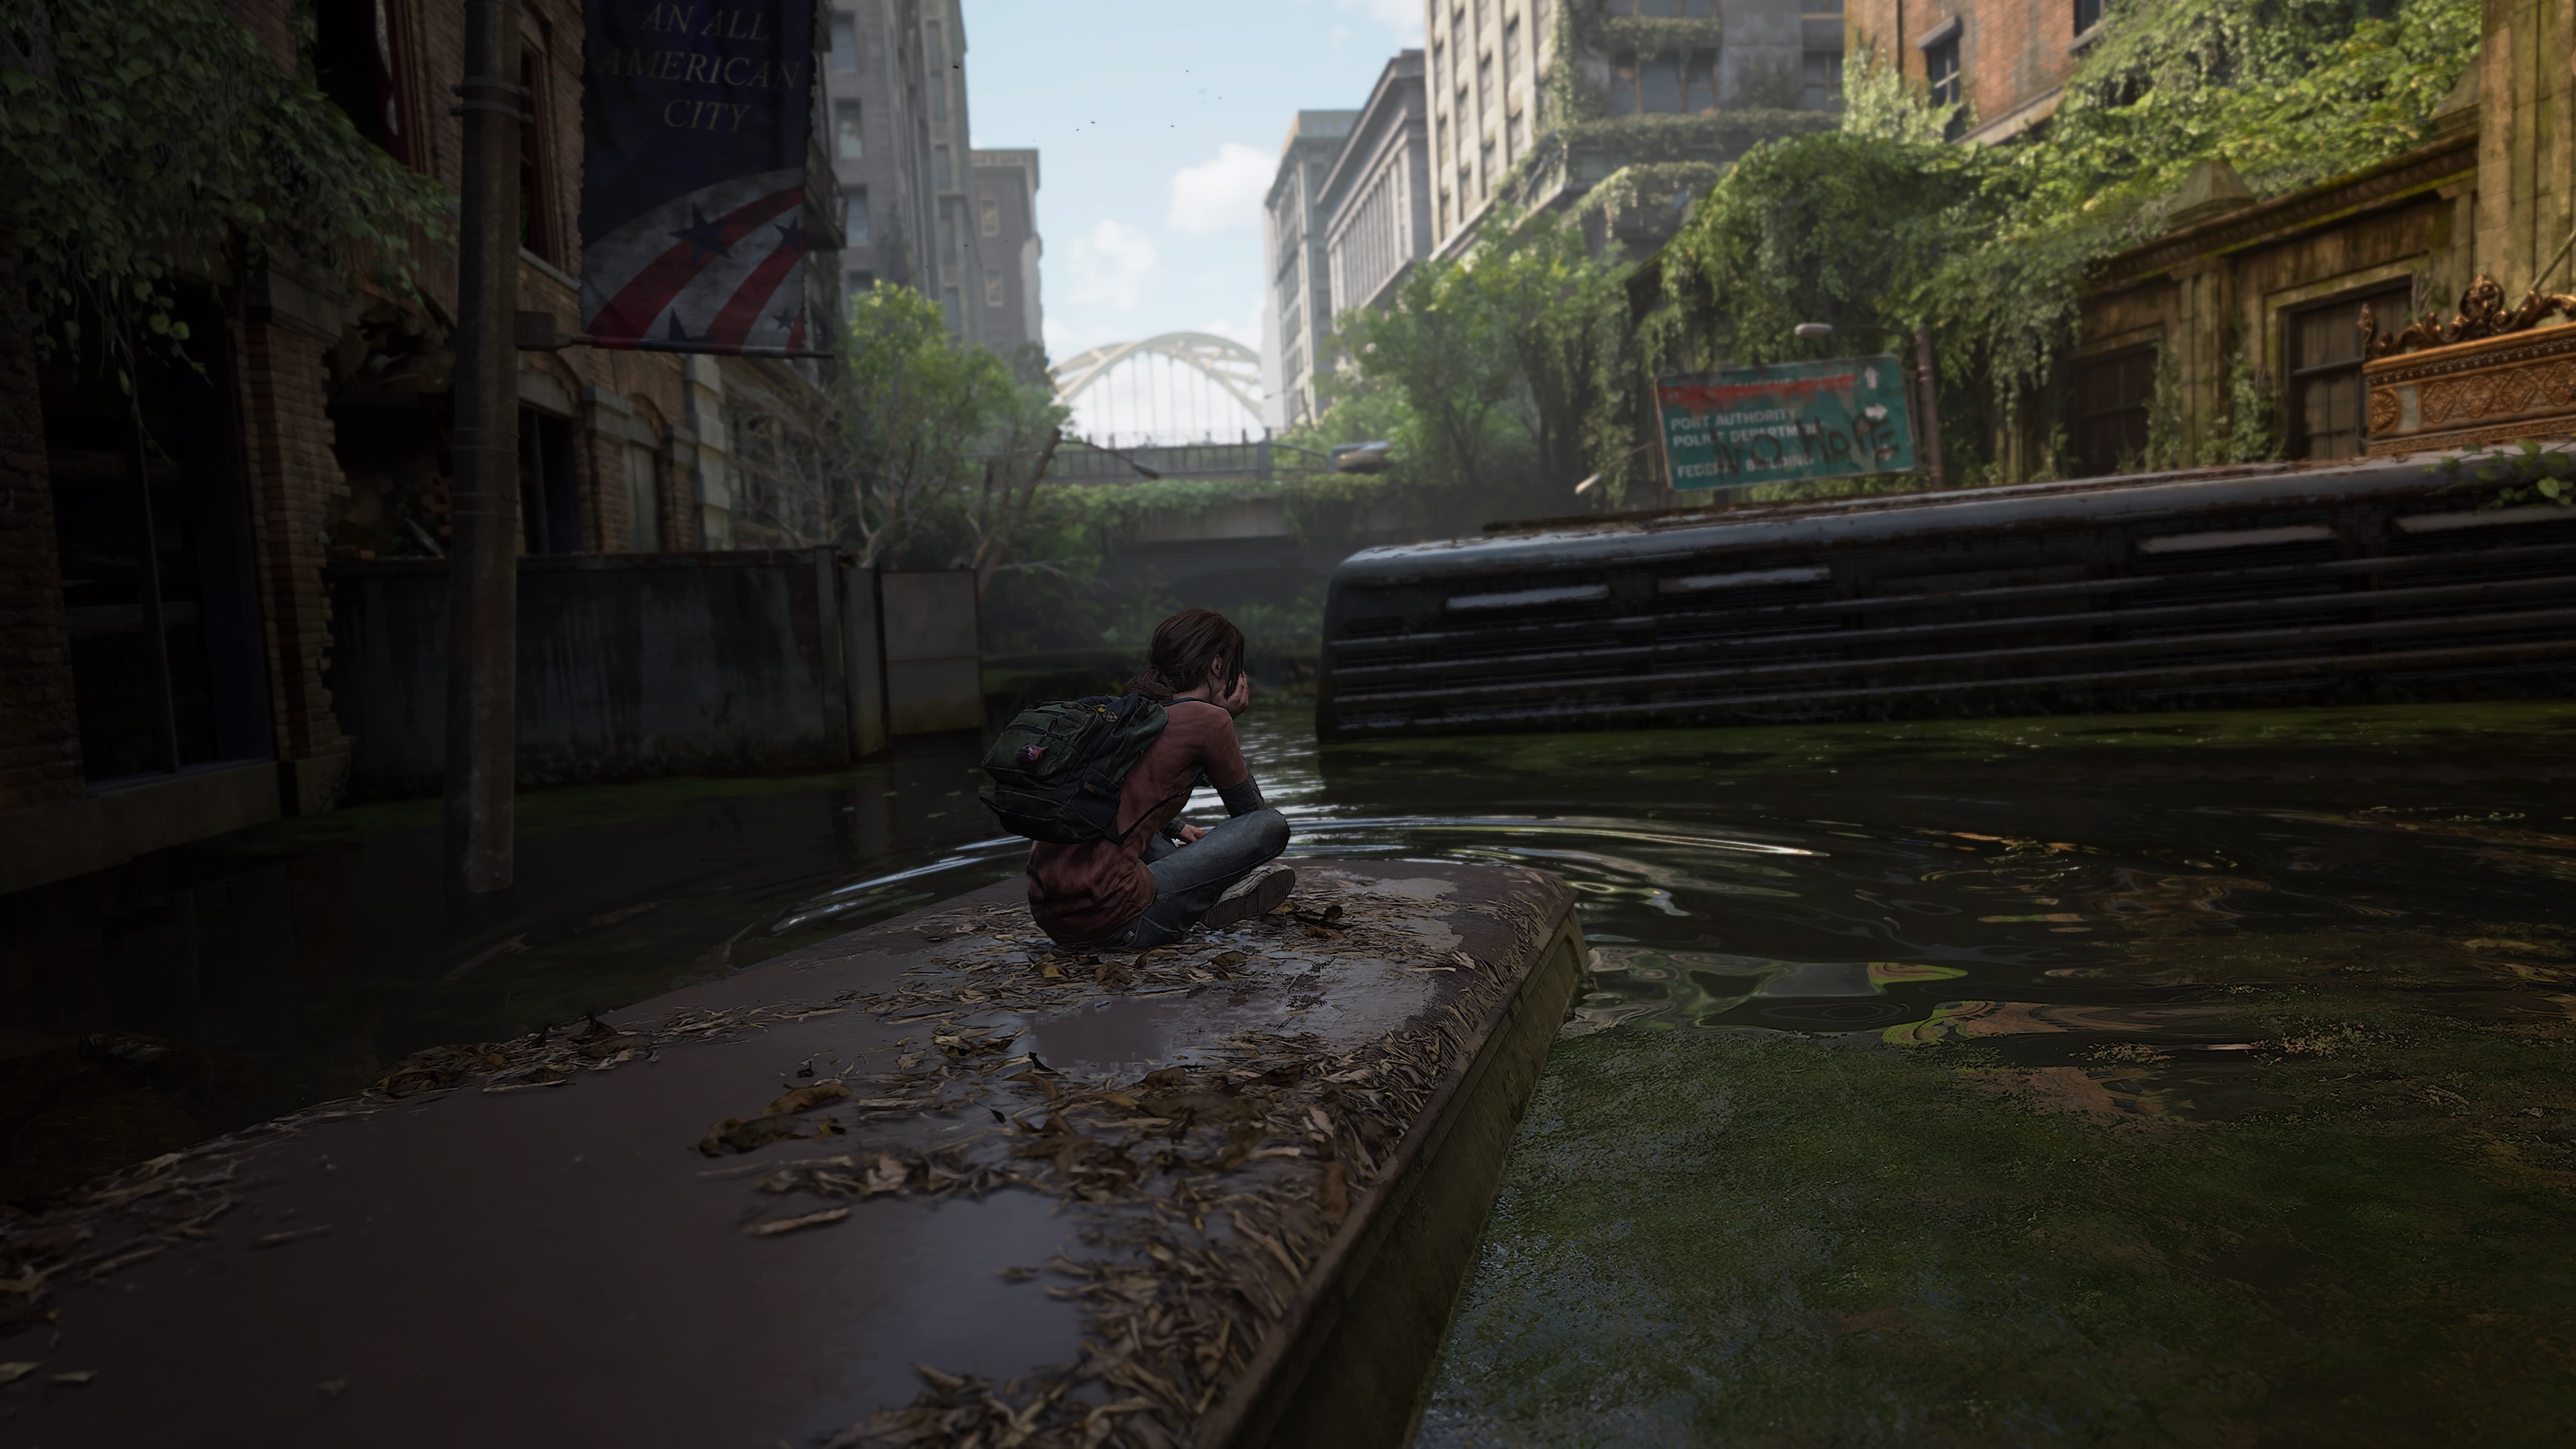 The Last Of Us Ellie Williams Playstation 5 Video Game Art Screen Shot Naughty Dog Video Games 3840x2160